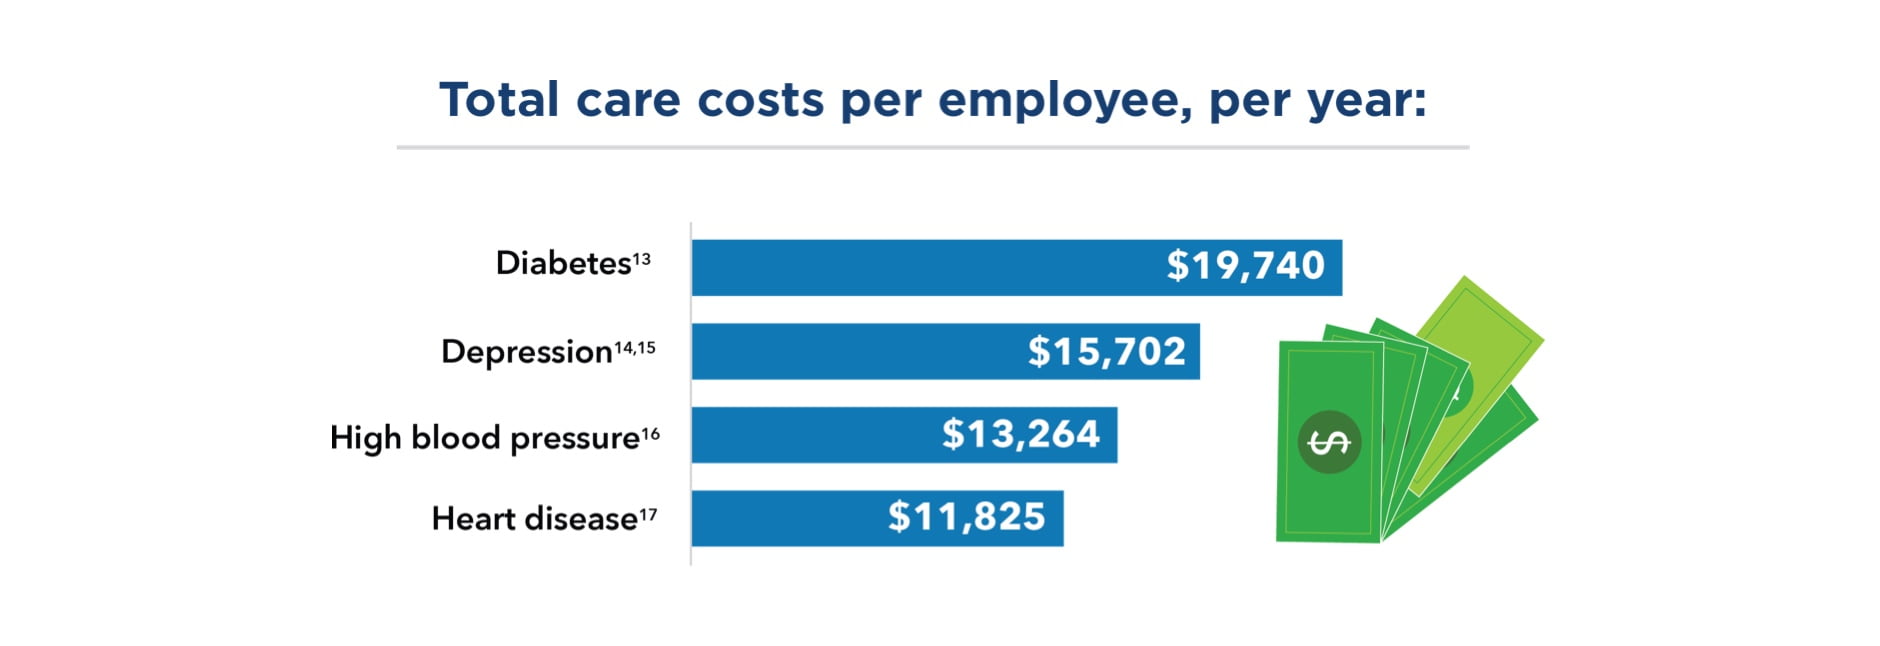 Bar chart showing Total care costs per employee, per year: $19,740 for diabetes, footnote 13; $15,702 for depression, footnotes 14 and 15; $13,264 for high blood pressure, footnote 16; and $11,825 for heart disease, footnote 17